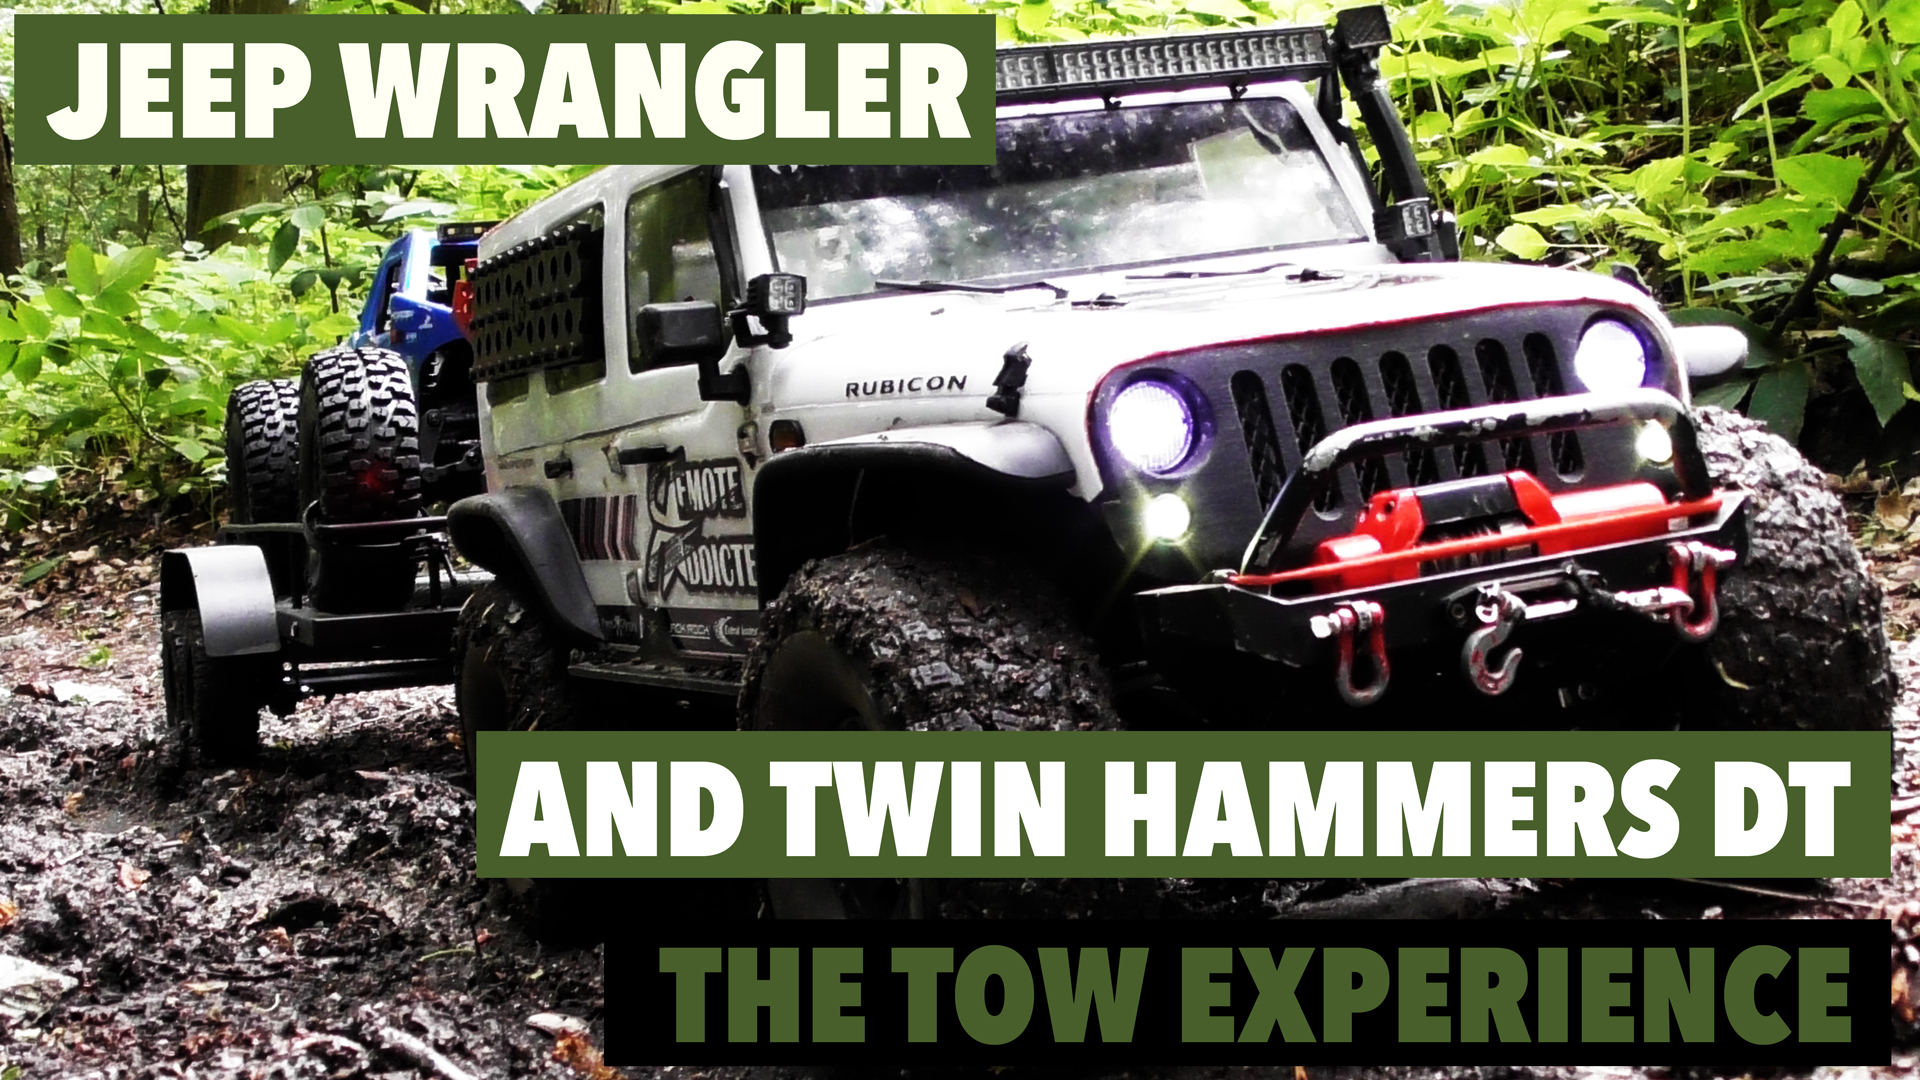 Axial scx10 jeep wrangler vaterra twin hammers dt